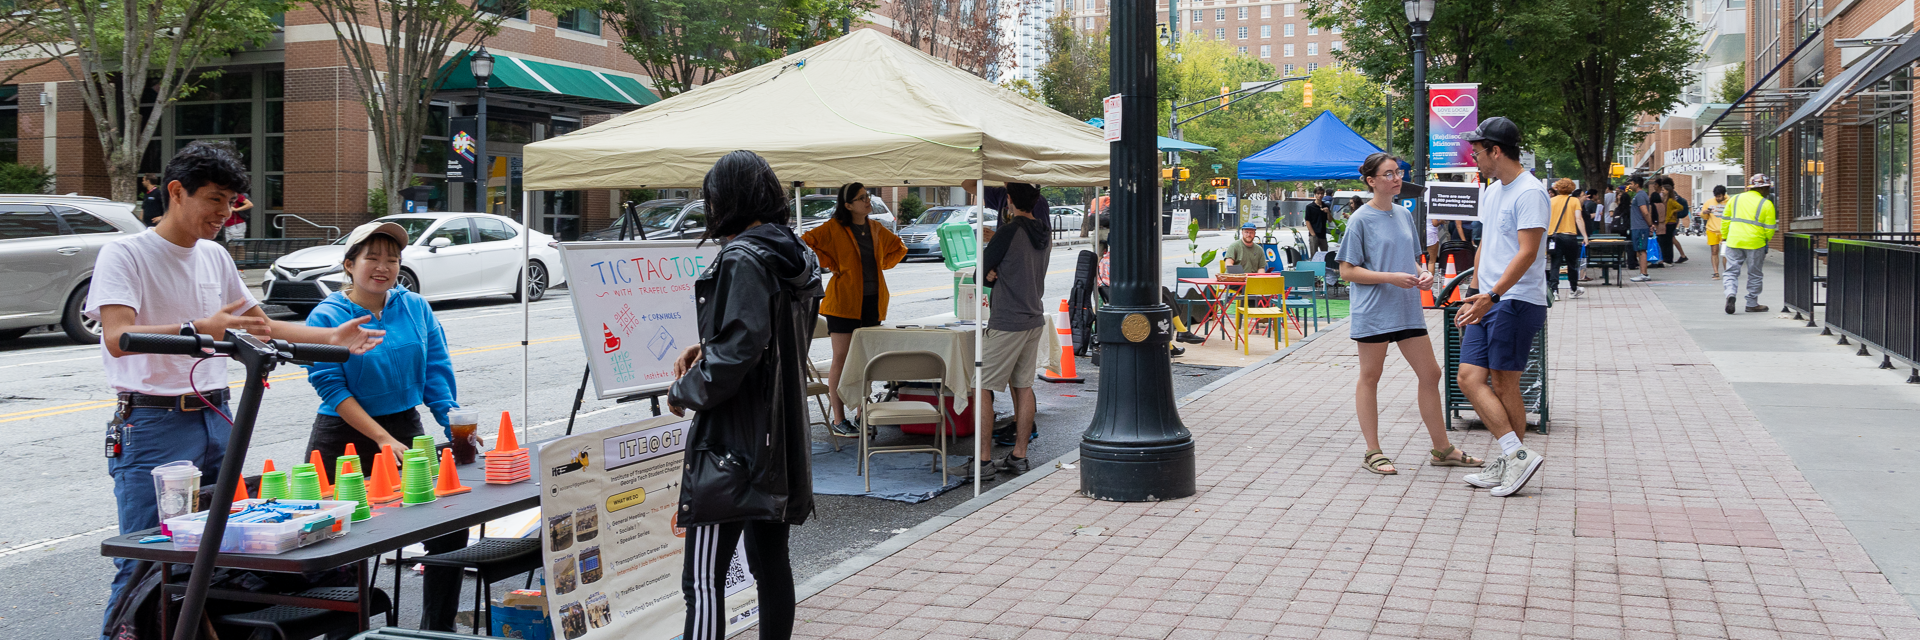 View down sidewalk showing street parking occupied by tents and informational tables